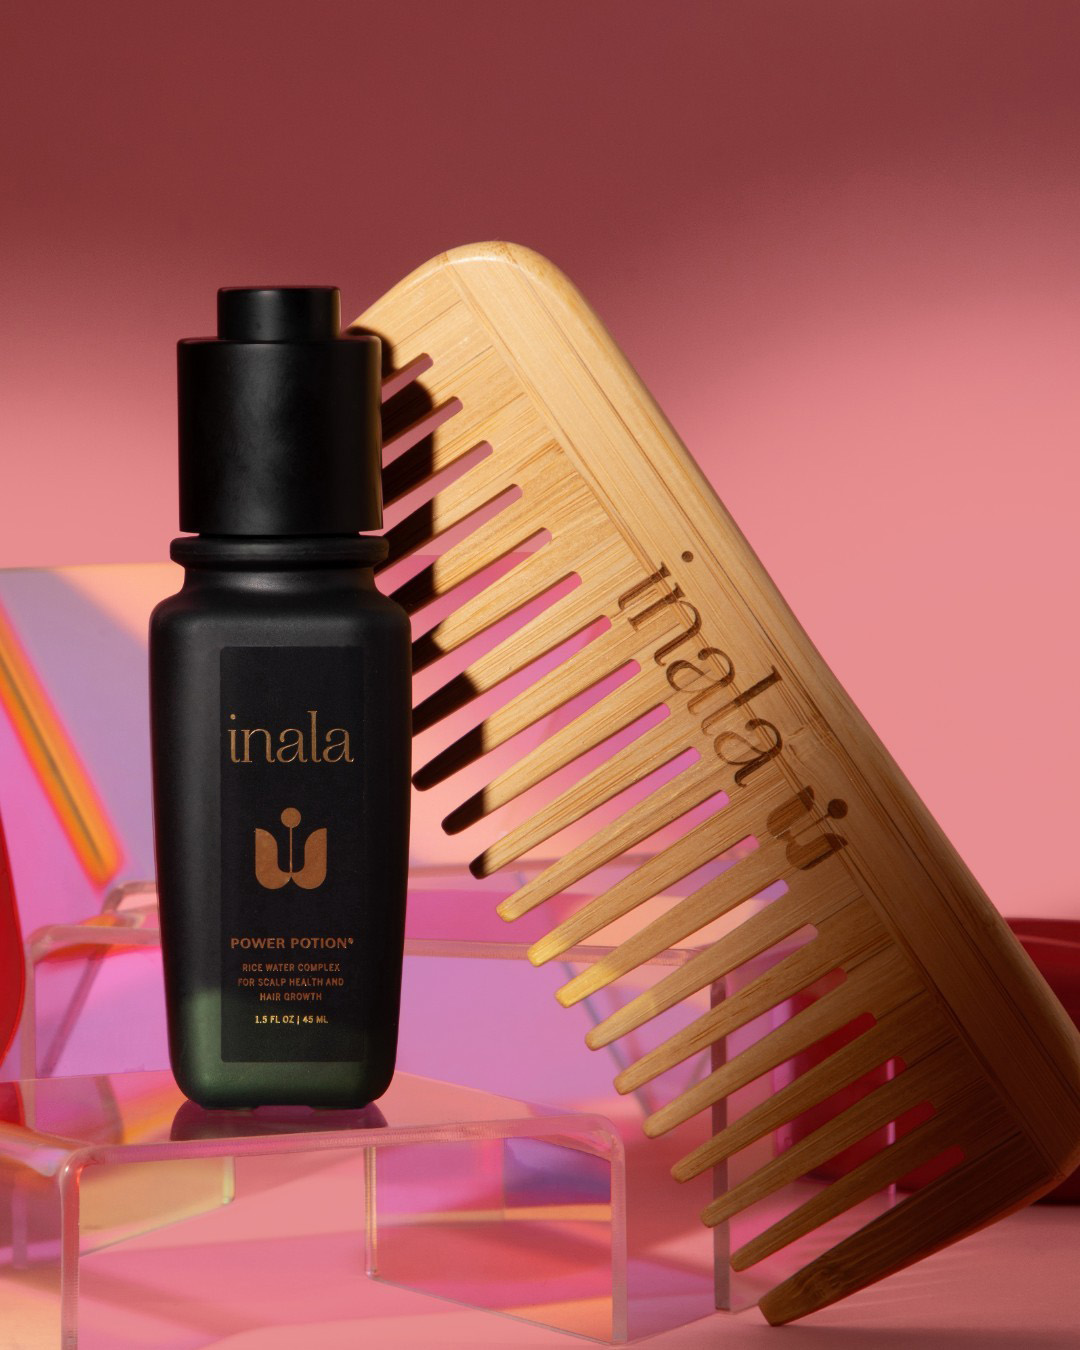 Inala Beauty hair product and comb